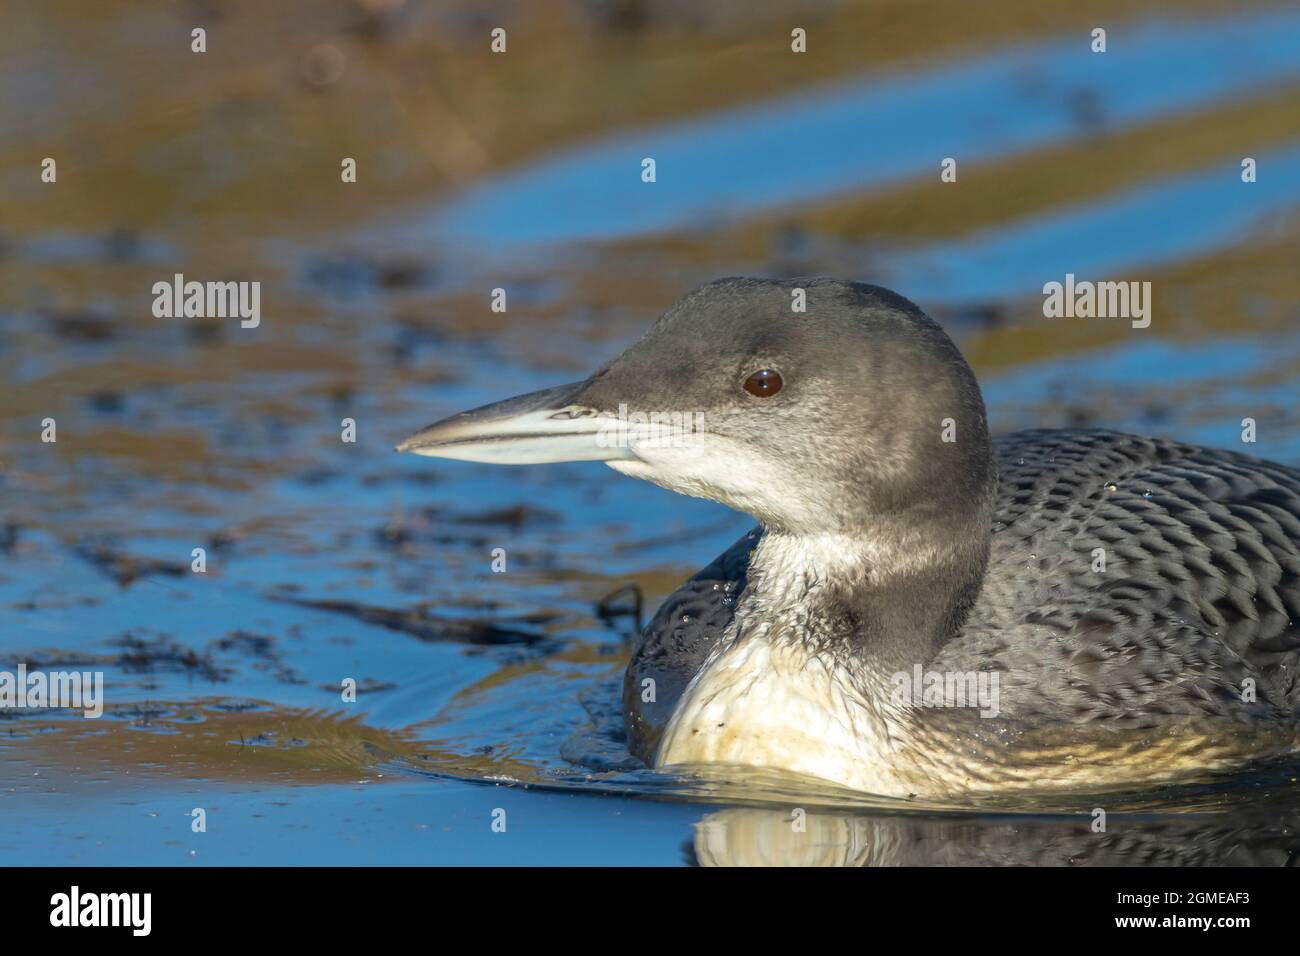 Closeup of a Common loon, Gavia immer, also known as the great northern diver or great northern loon hunting and eating crayfish Stock Photo